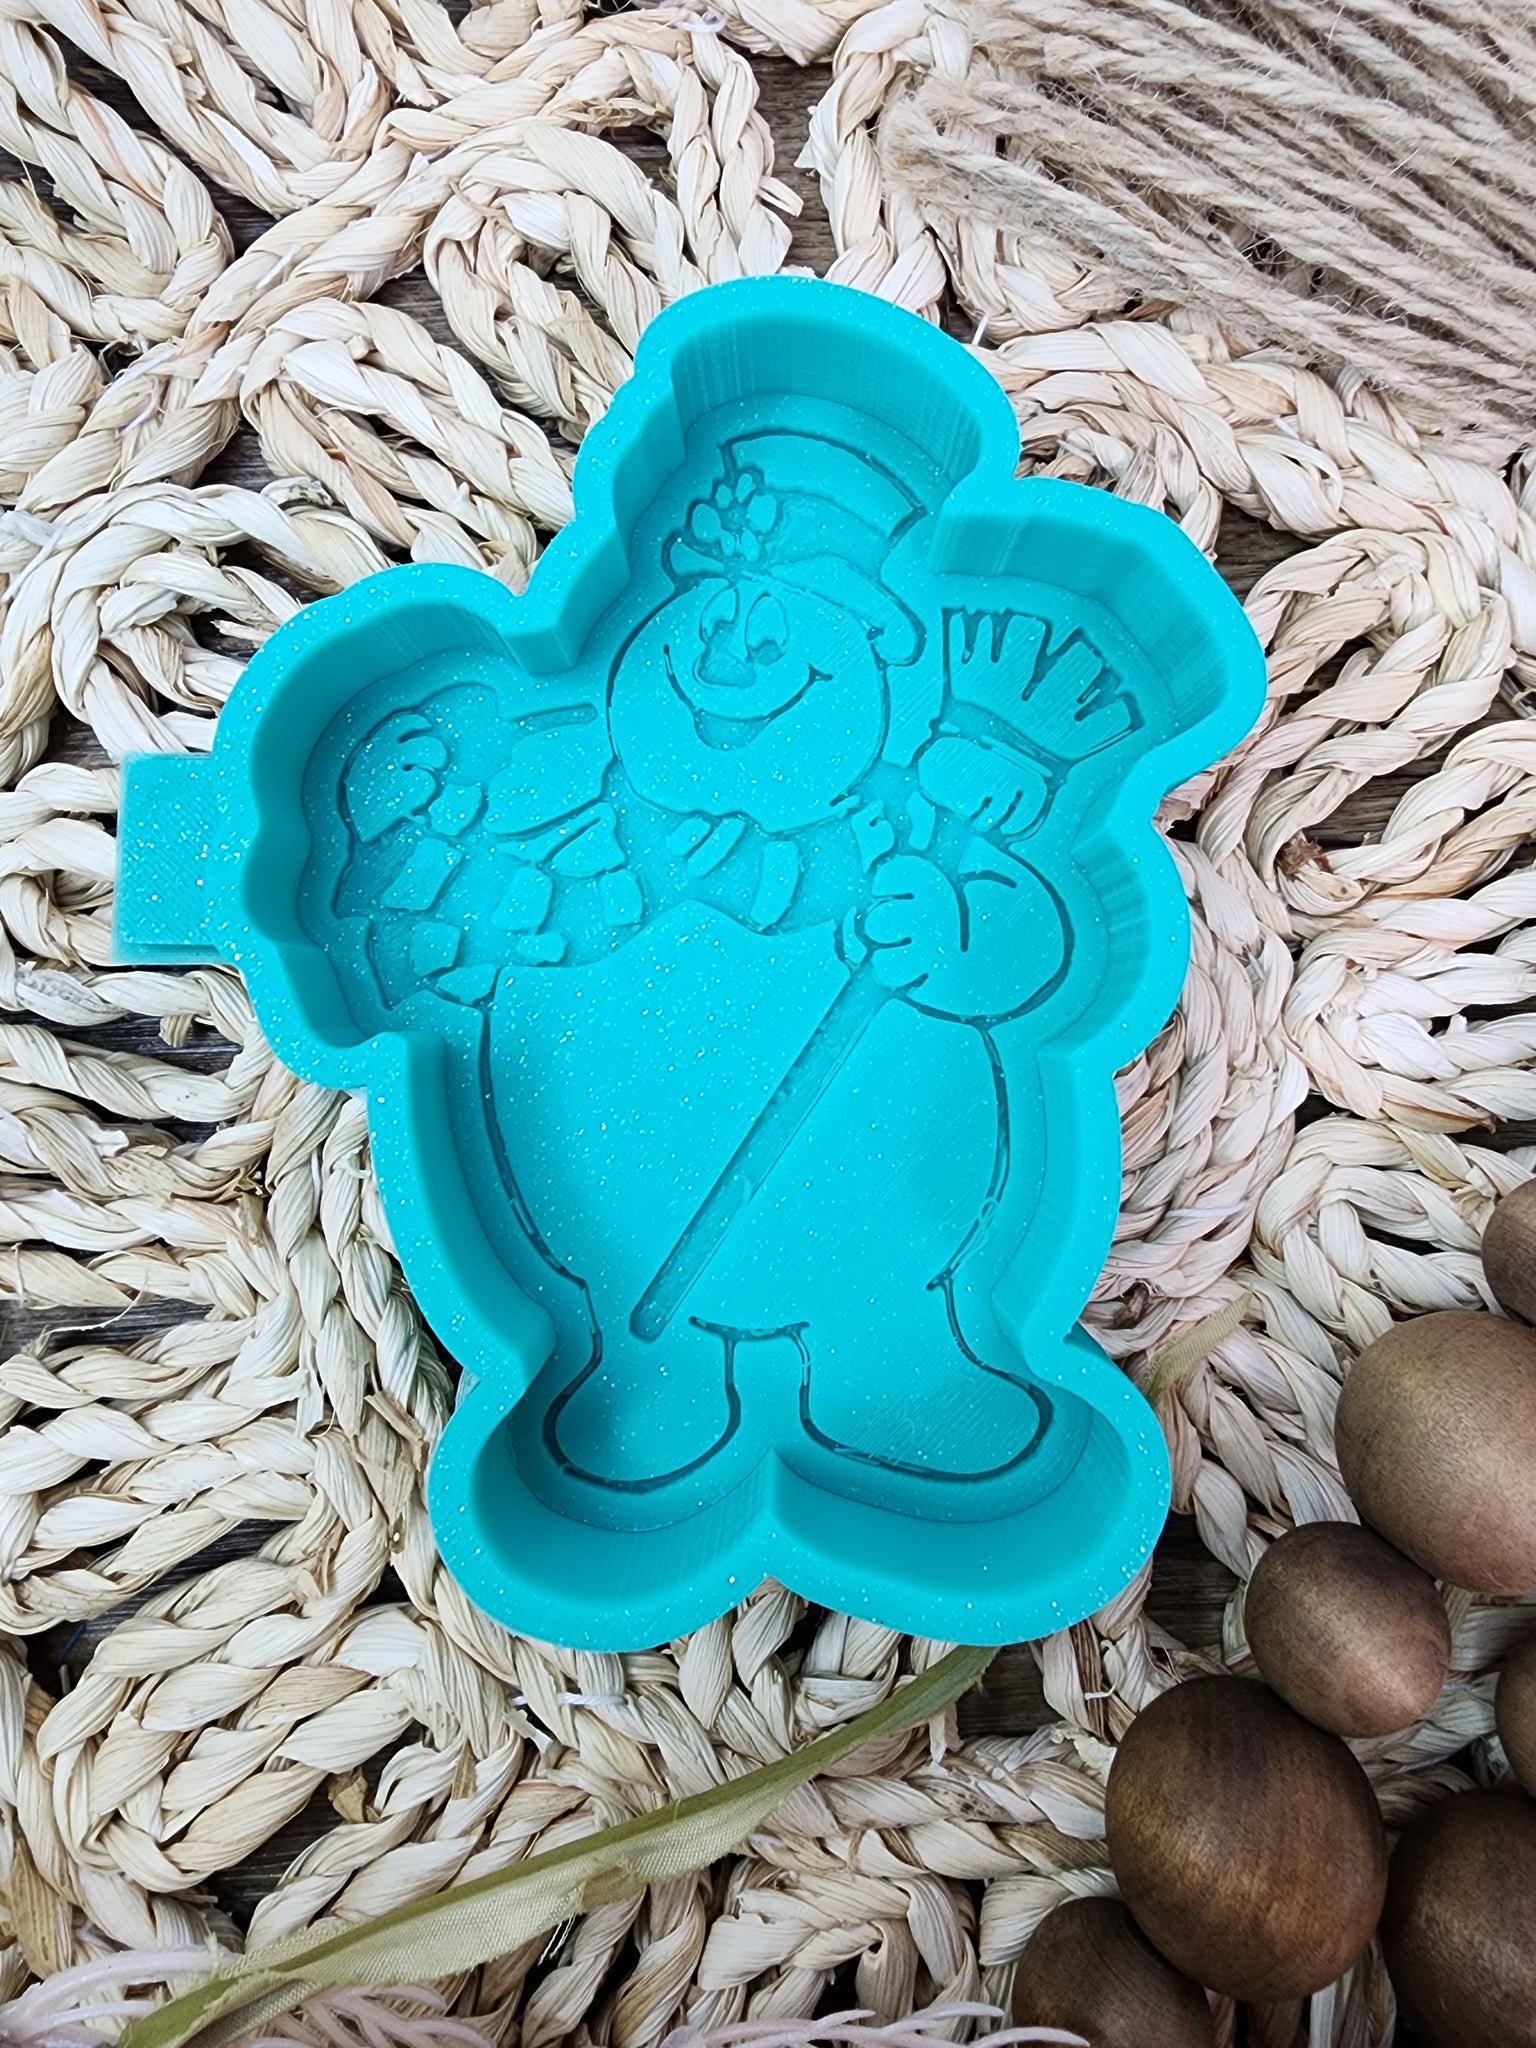 Frosty The Snowman Freshie Silicone Mold / Custom Made to Order / Freshie Mold